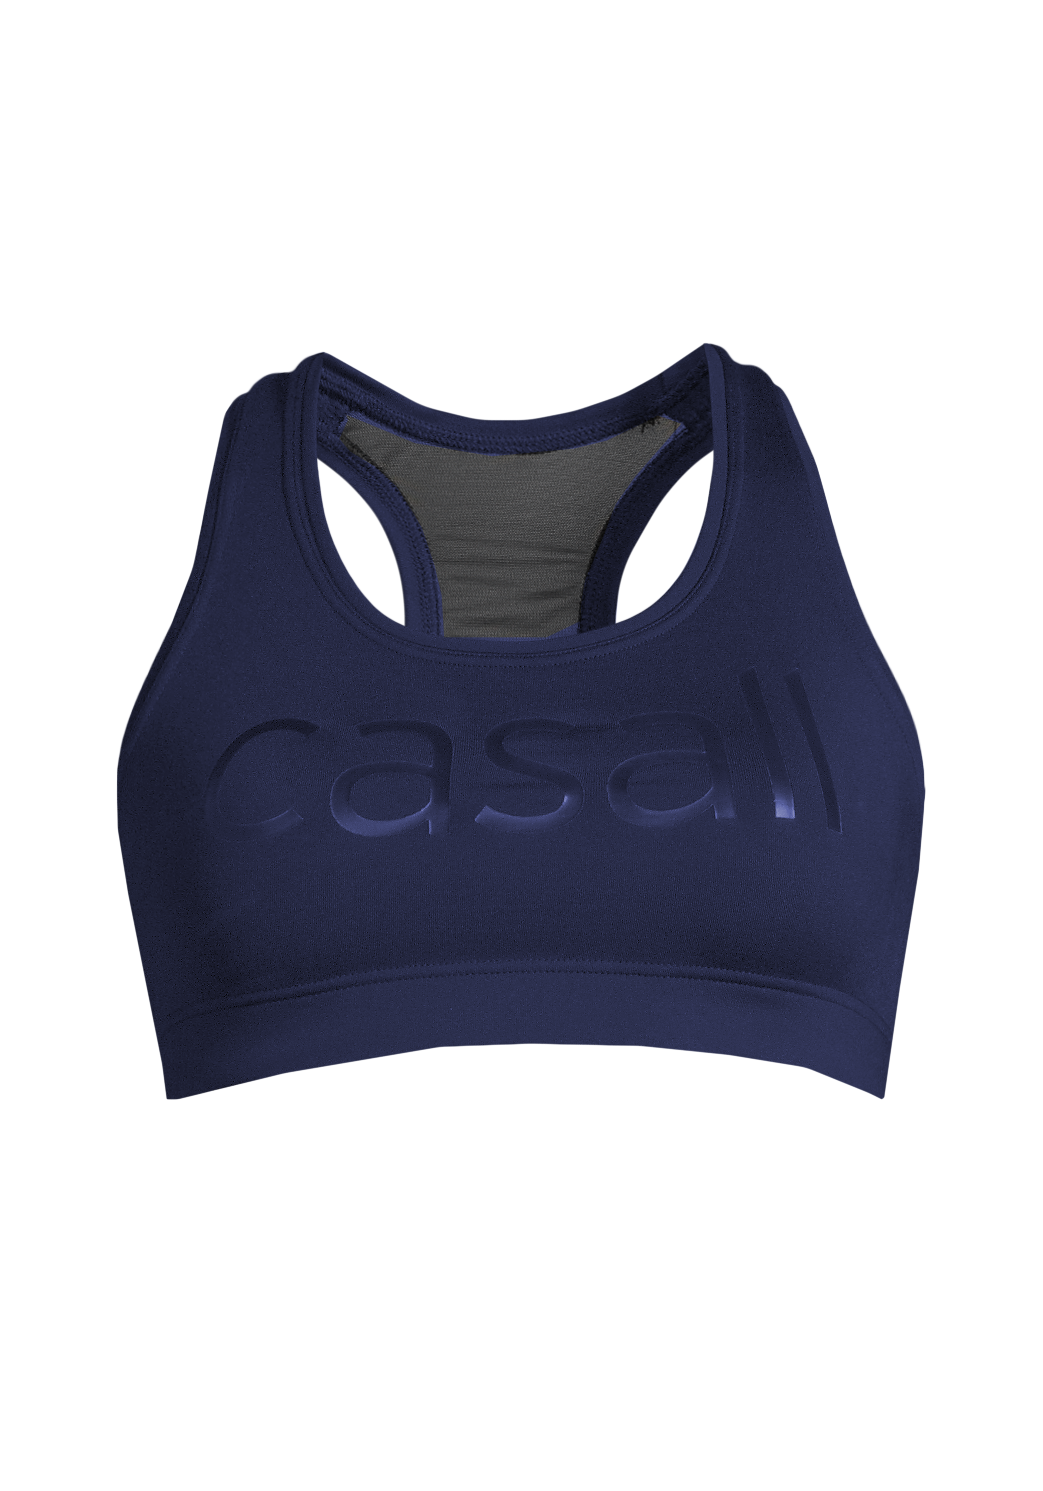 Casall Smooth sports bra Calming Red 